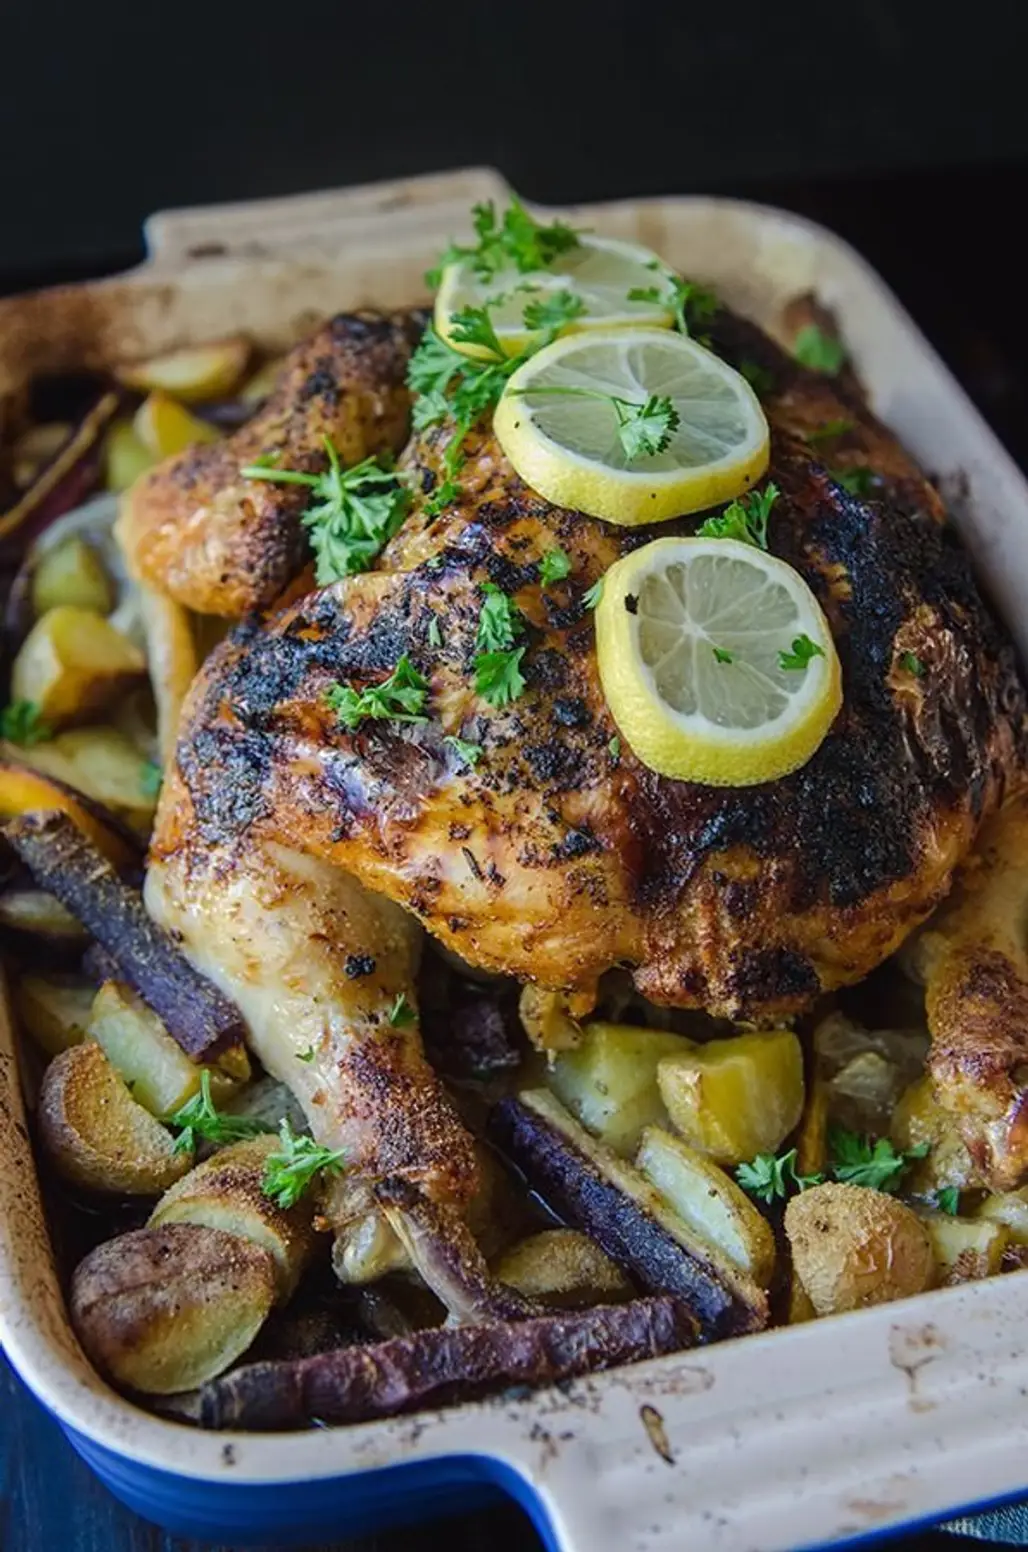 Whole Roasted Lemon and Rosemary Chicken with Garlic and Root Vegetables